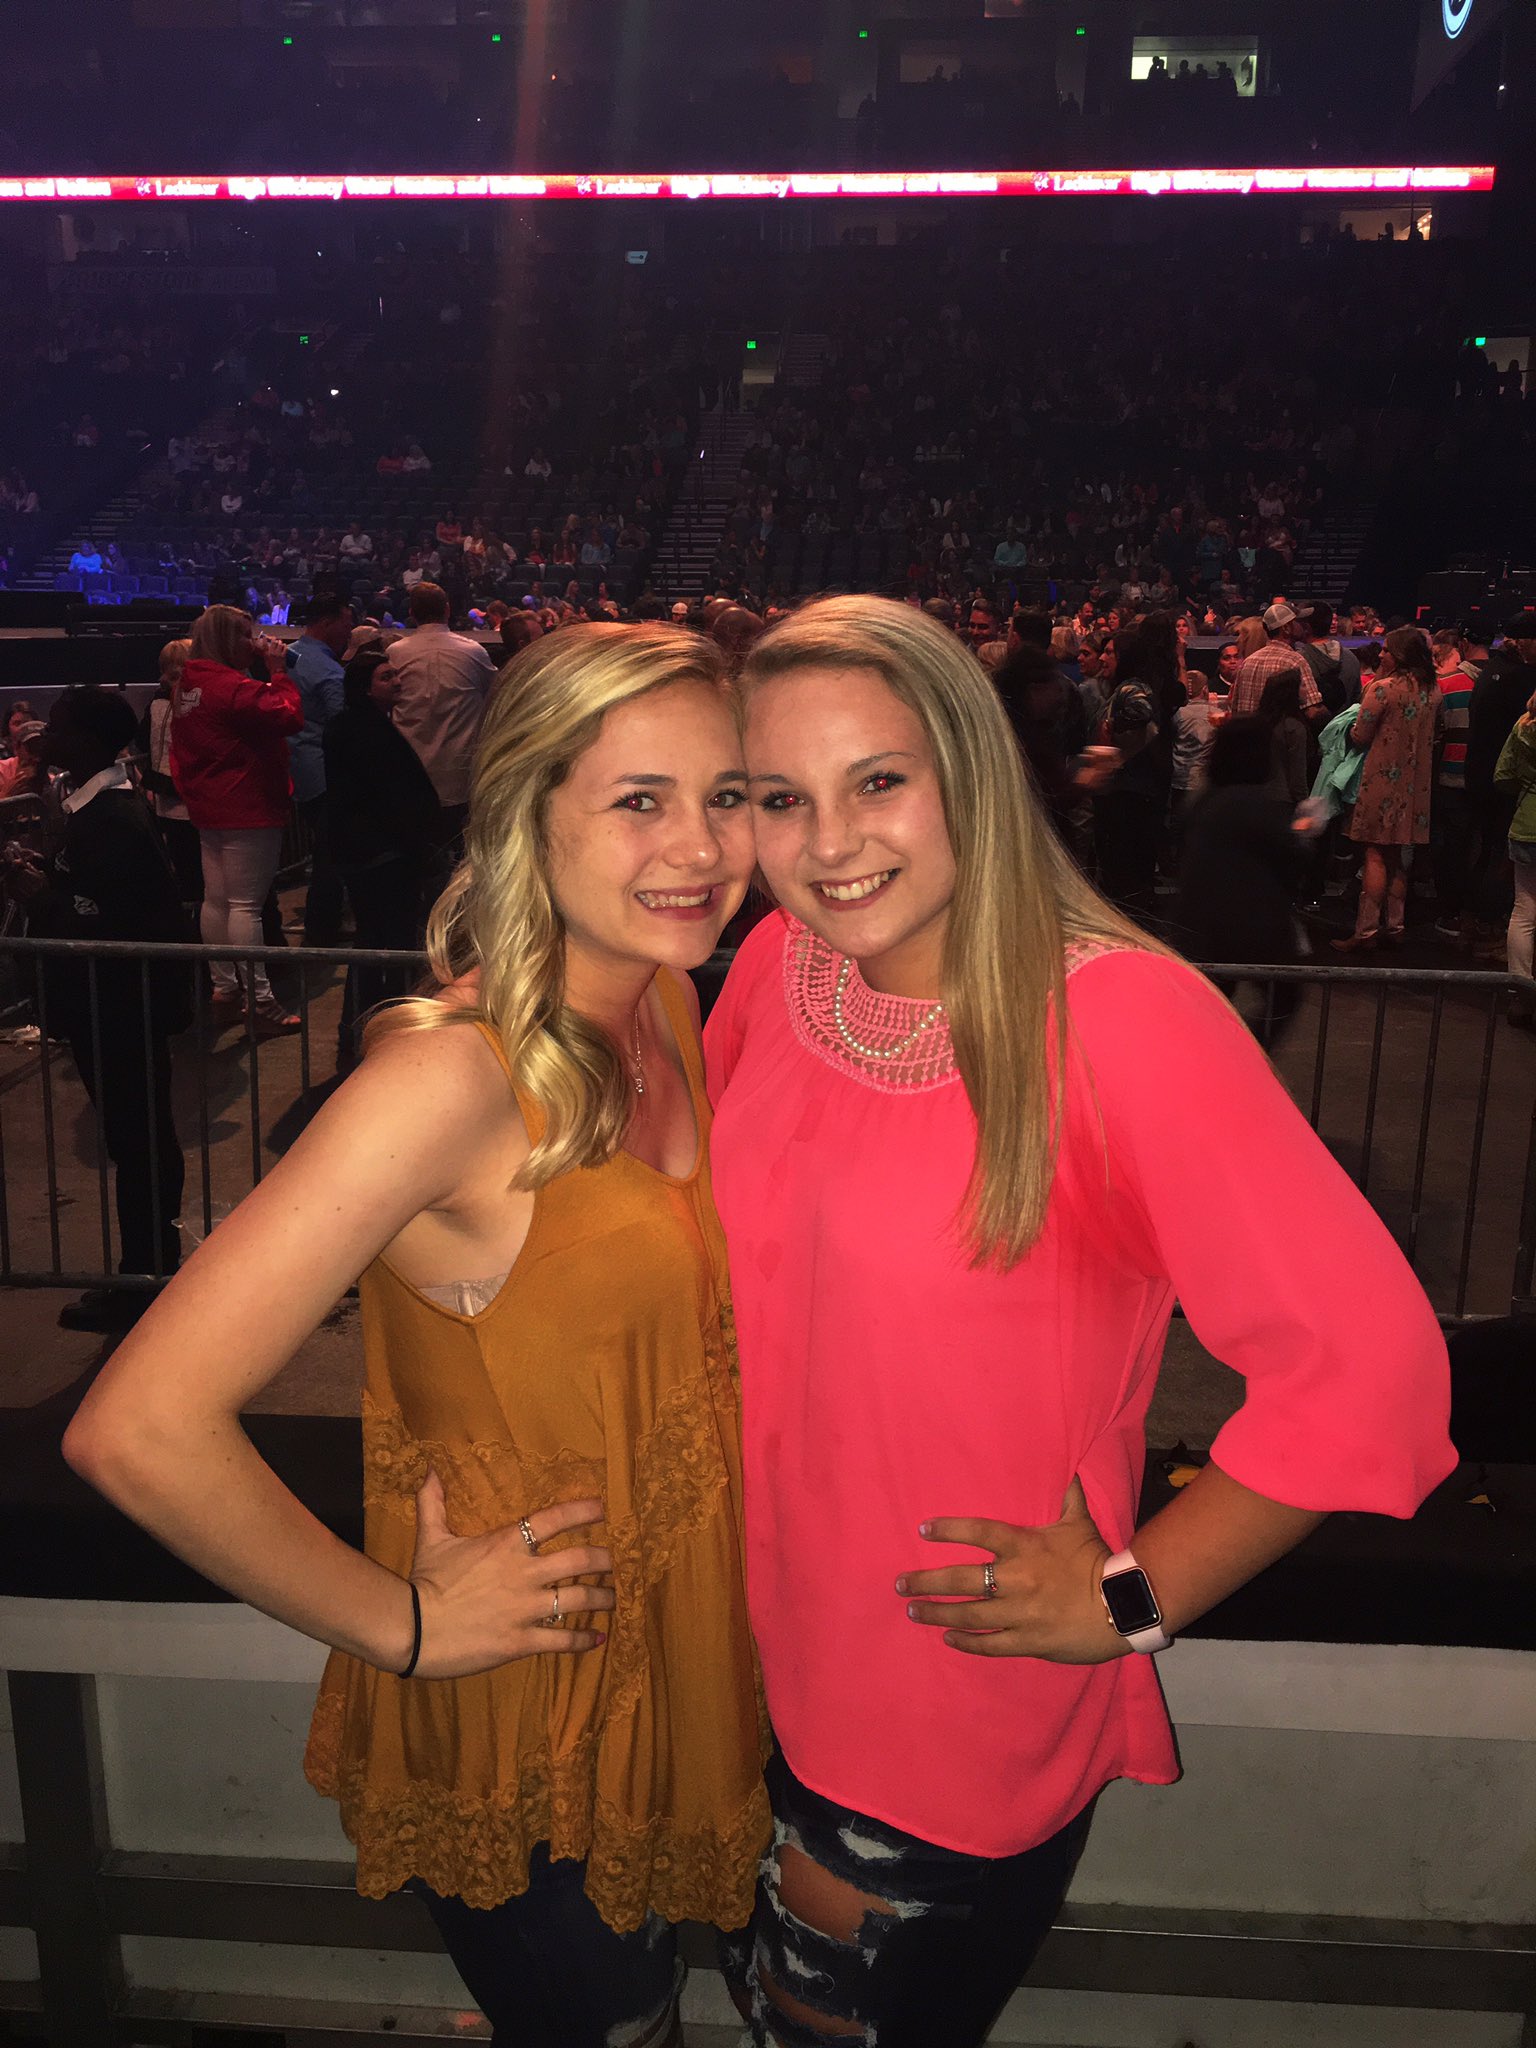 Happy birthday to my luke bryan concert buddy! i hope you have the best day ever! ily!   